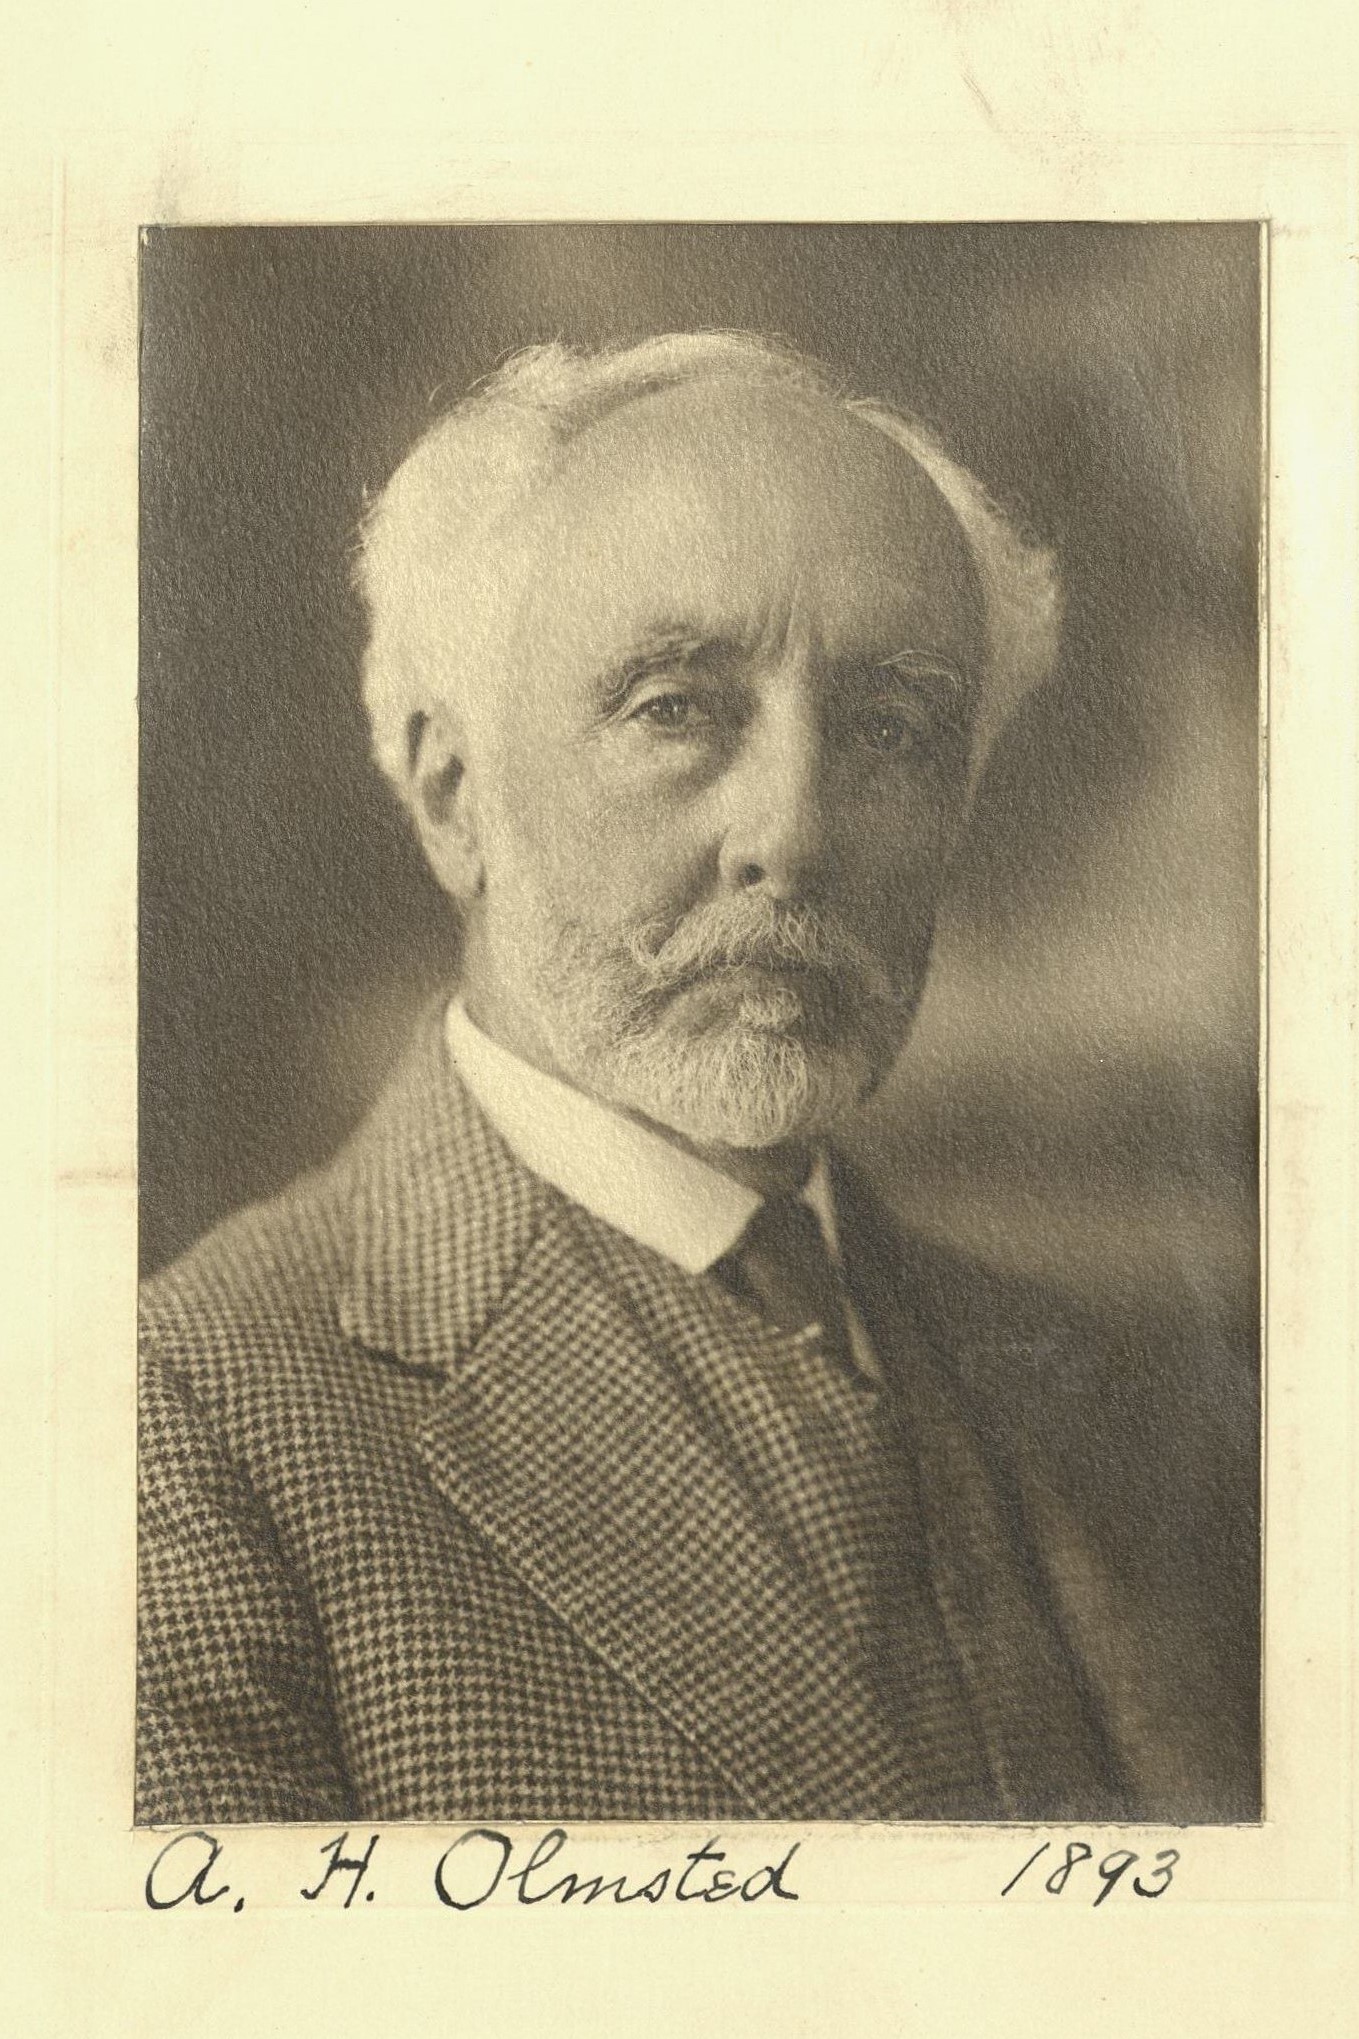 Member portrait of A. H. Olmsted